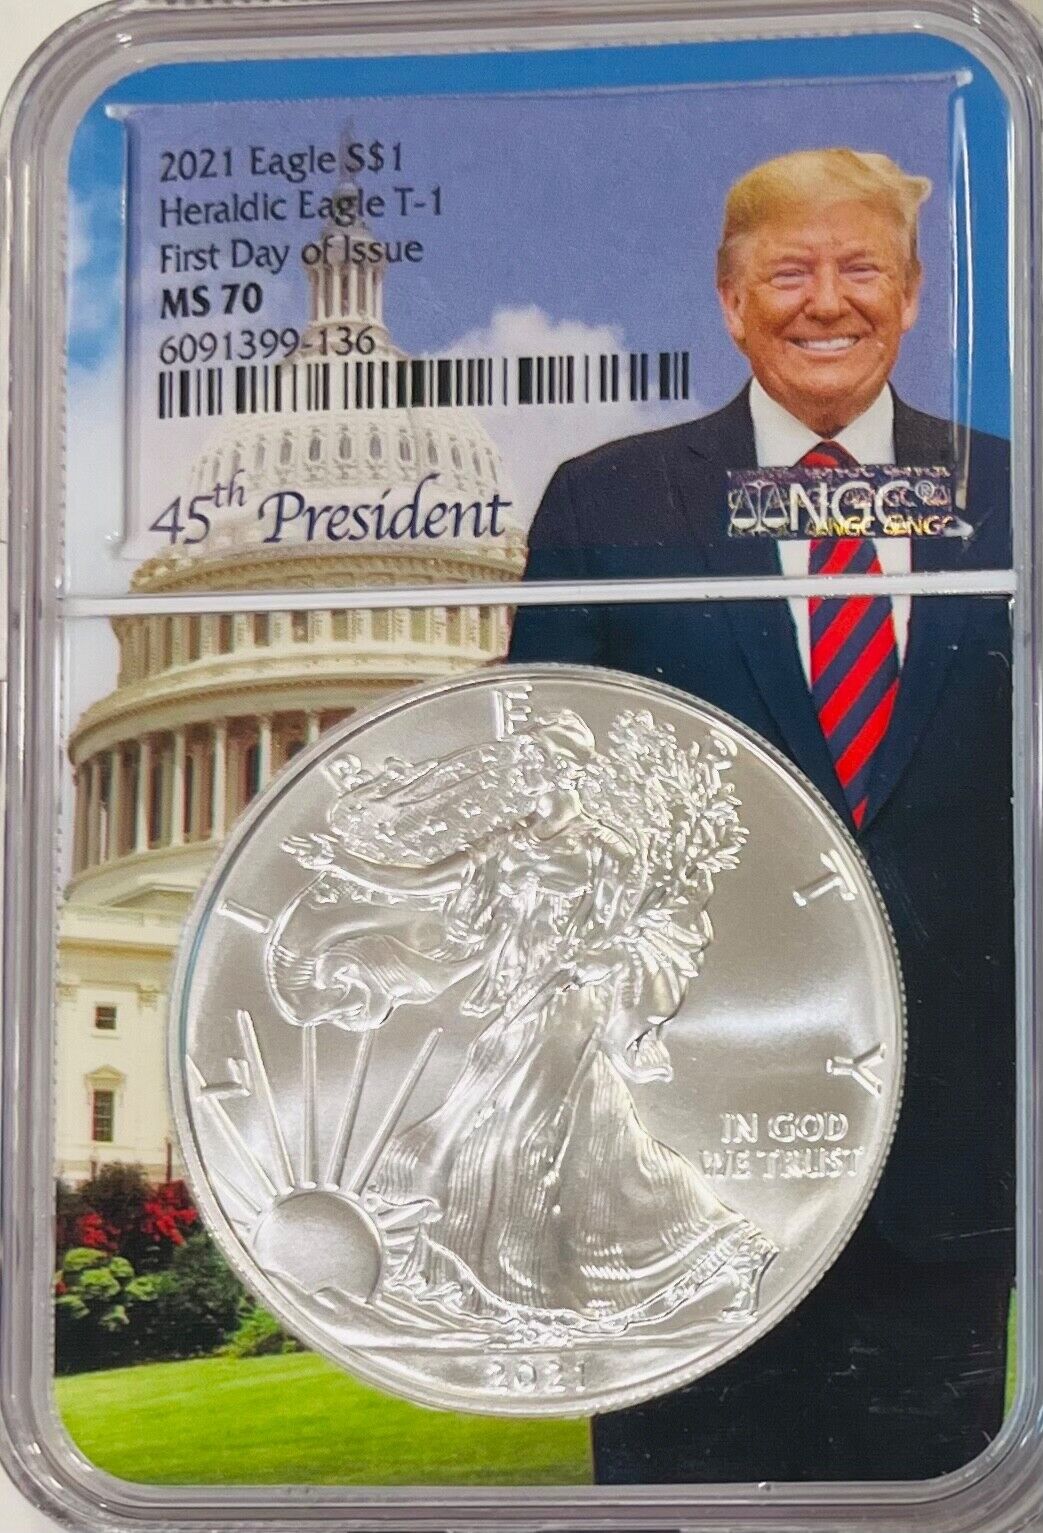 2021 American Silver Eagle $1  T-1 DONALD TRUMP  NGC MS70 FIRST DAY OF ISSUE